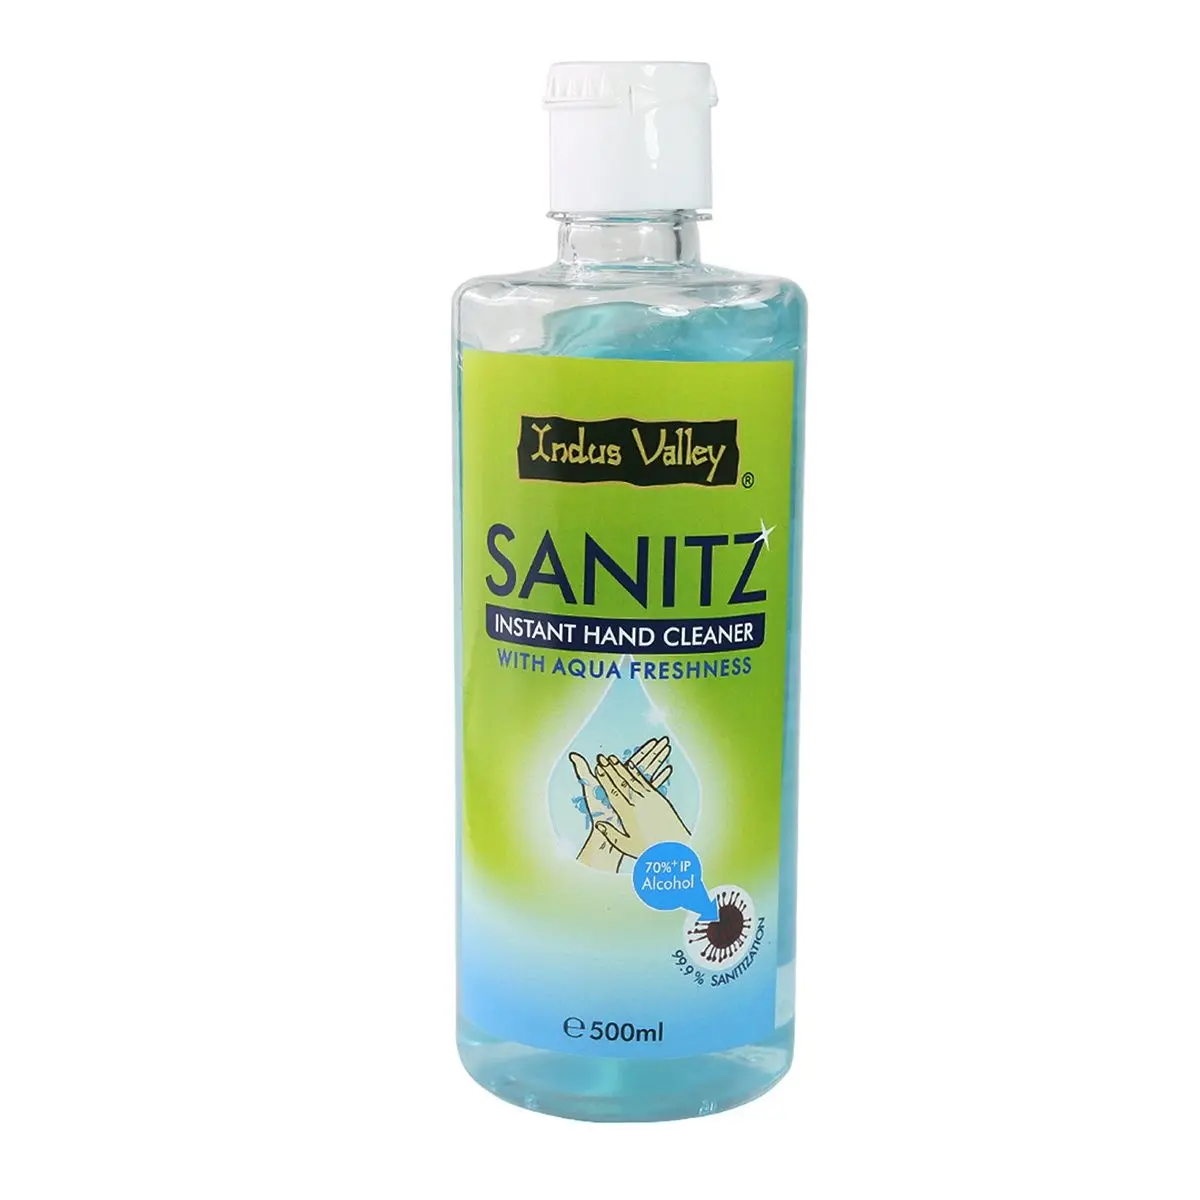 Indus Valley instant hand cleaner sanitizer with aqua freshness- (500 ml)